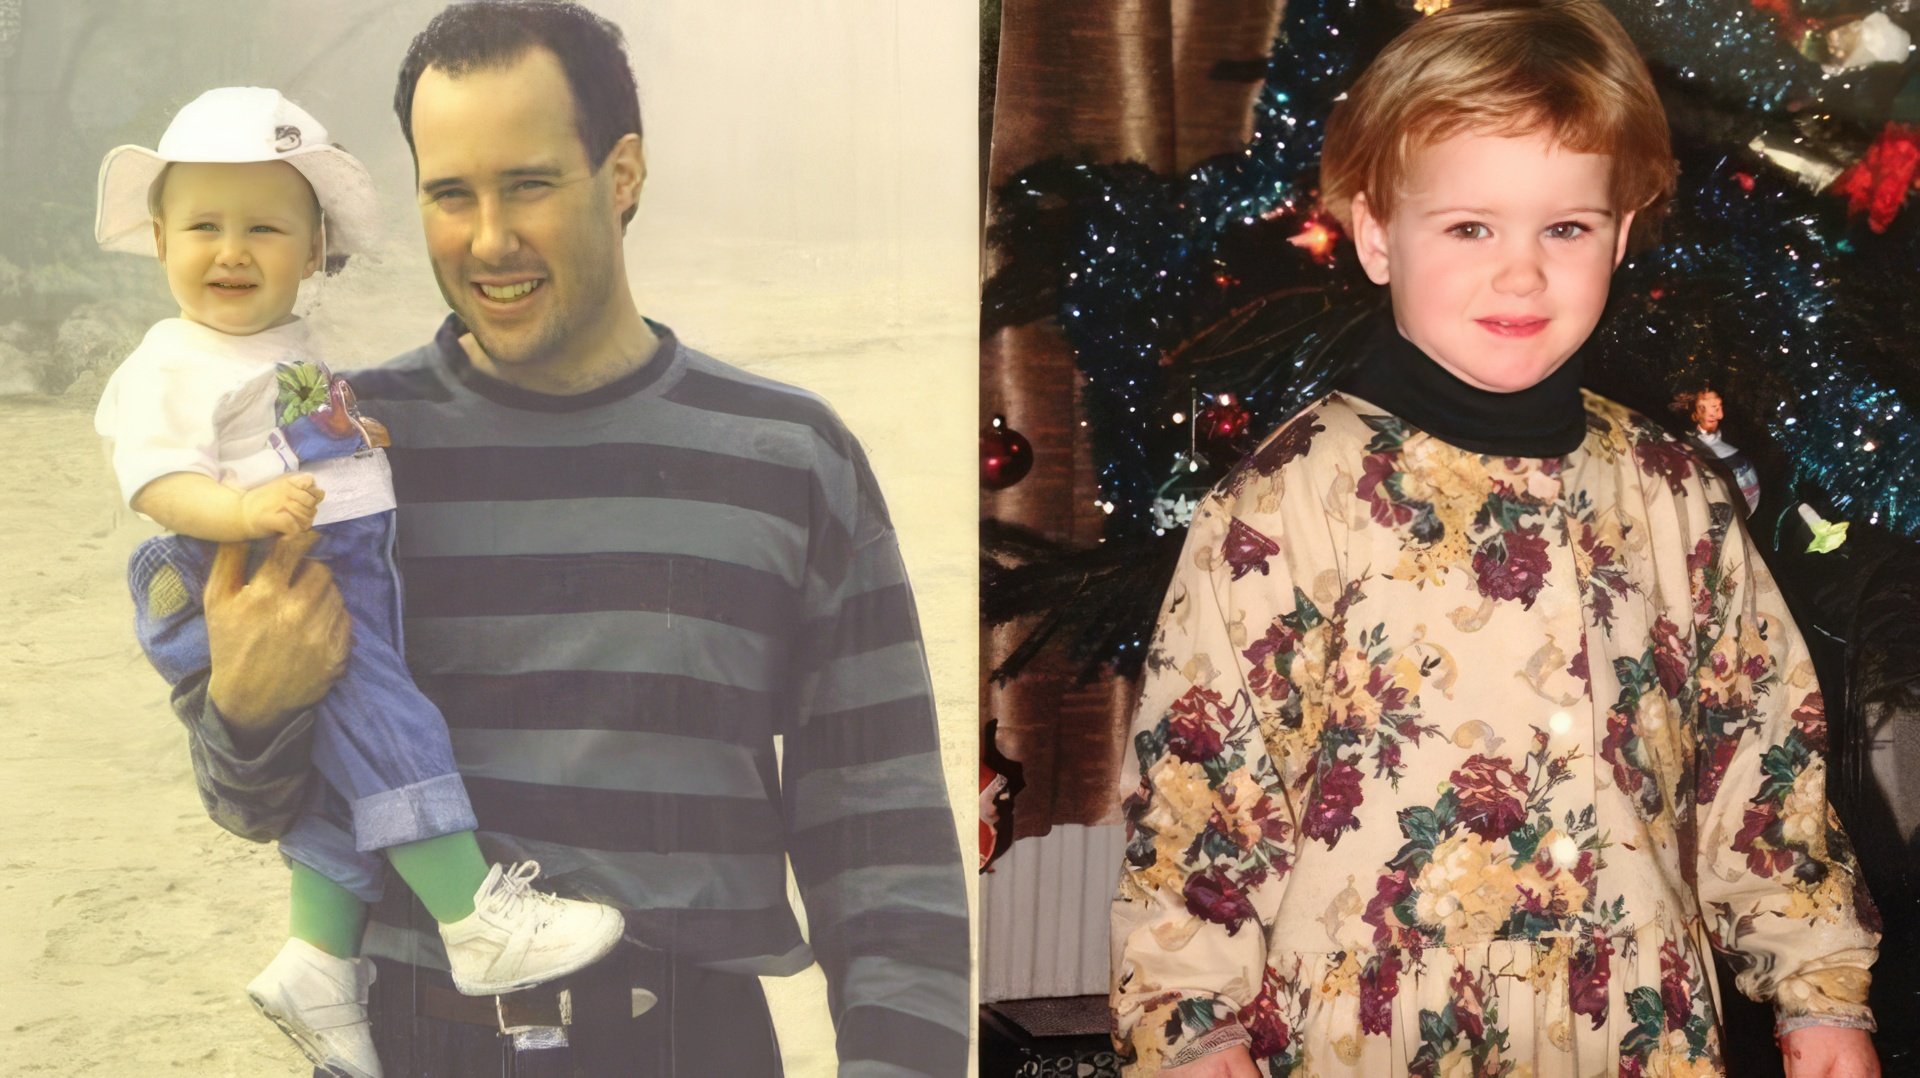 Rachel Brosnahan with her father in childhood